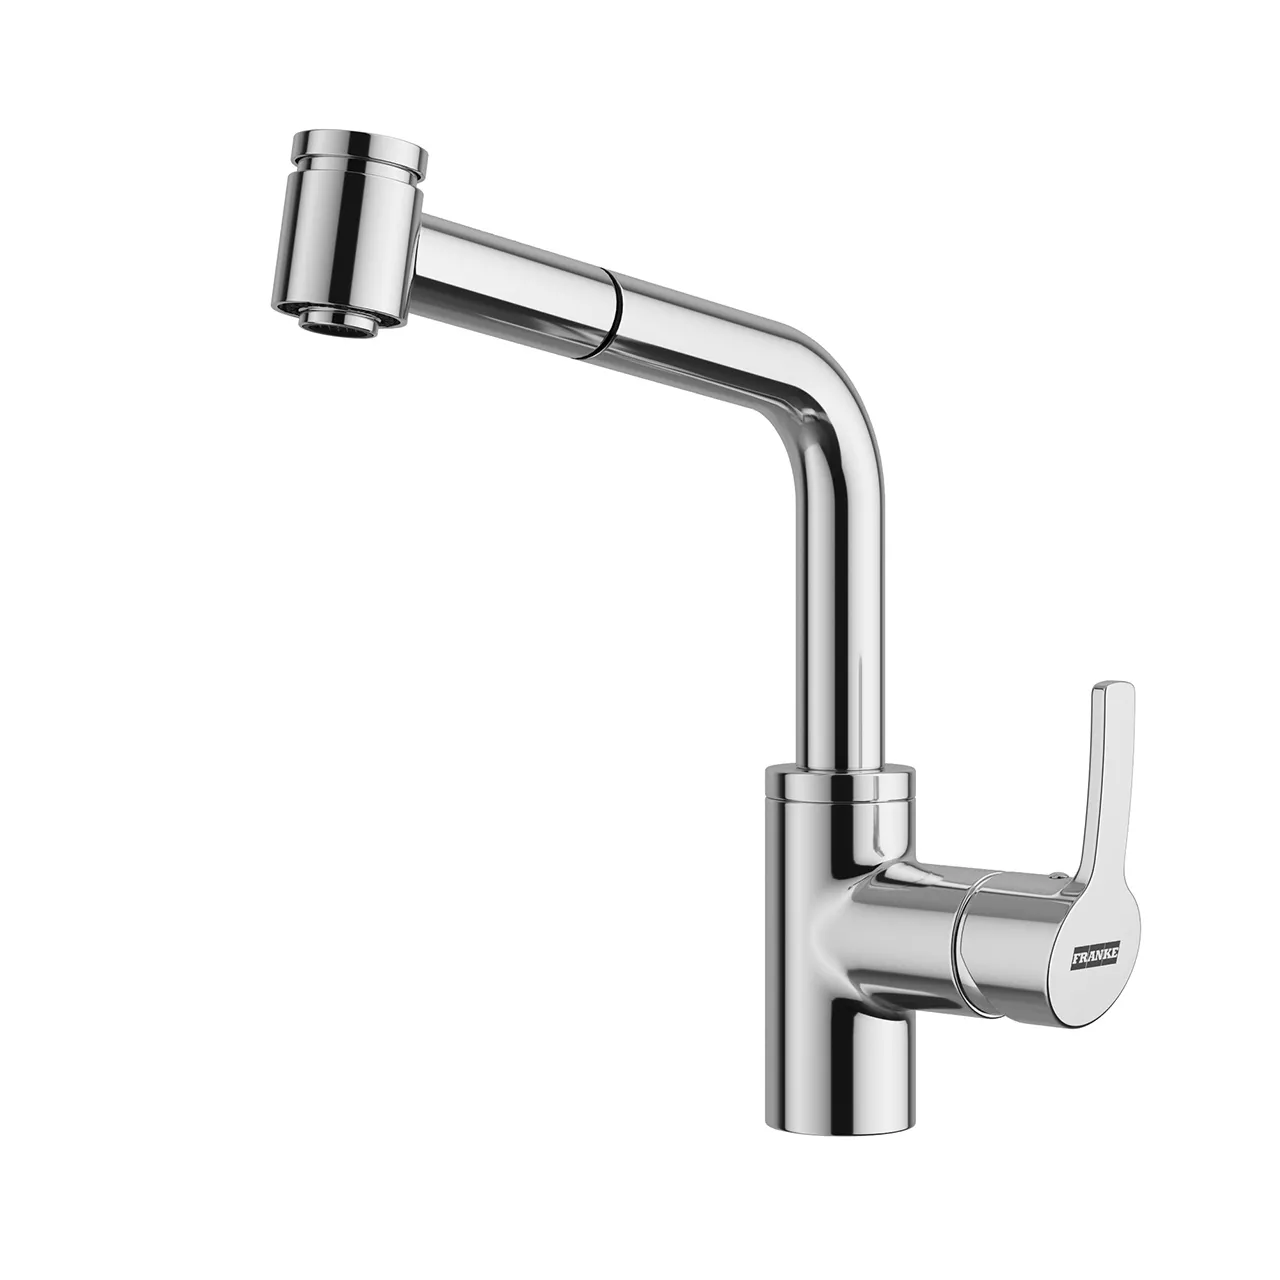 Kitchen – smart-kitchen-tap-pull-out-spray-l-by-franke